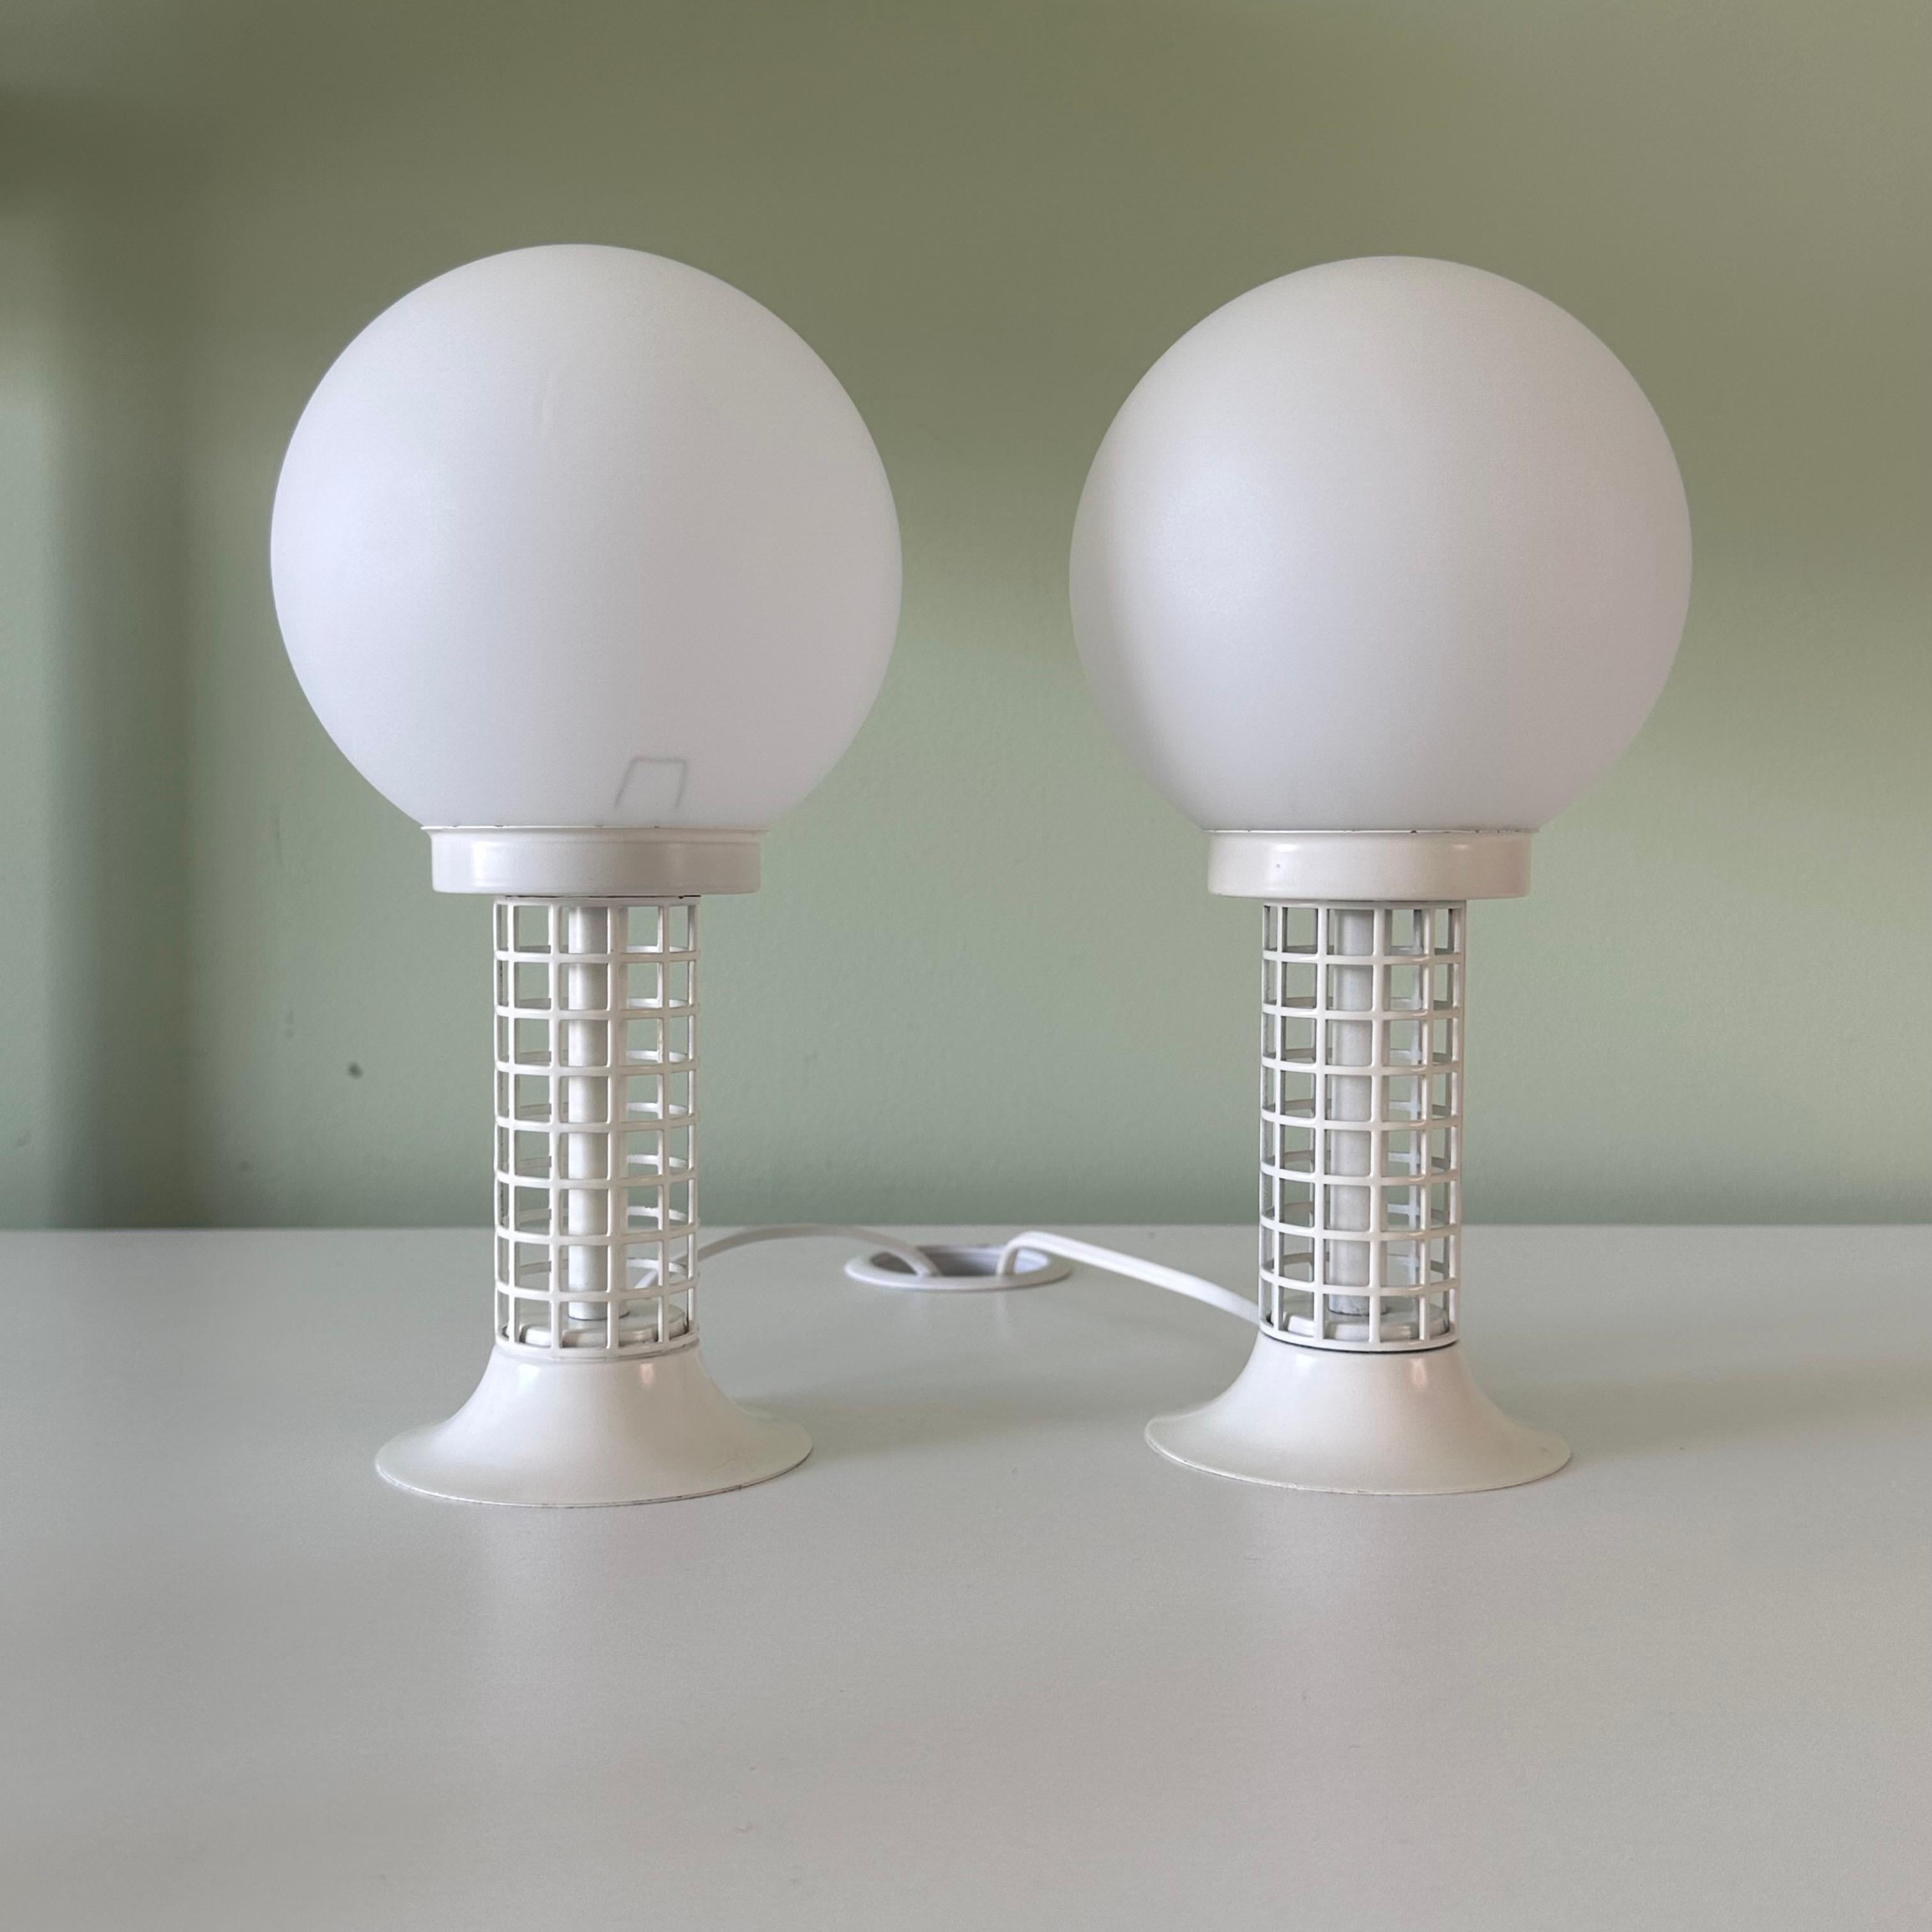 Pair of vintage 1970s modernist style vintage table lamps. Perfect all white look. The top half features white frosted spherical glass globe shades, supported by a white painted metal base with windowpane, grid or perforated motif. Socket mounted